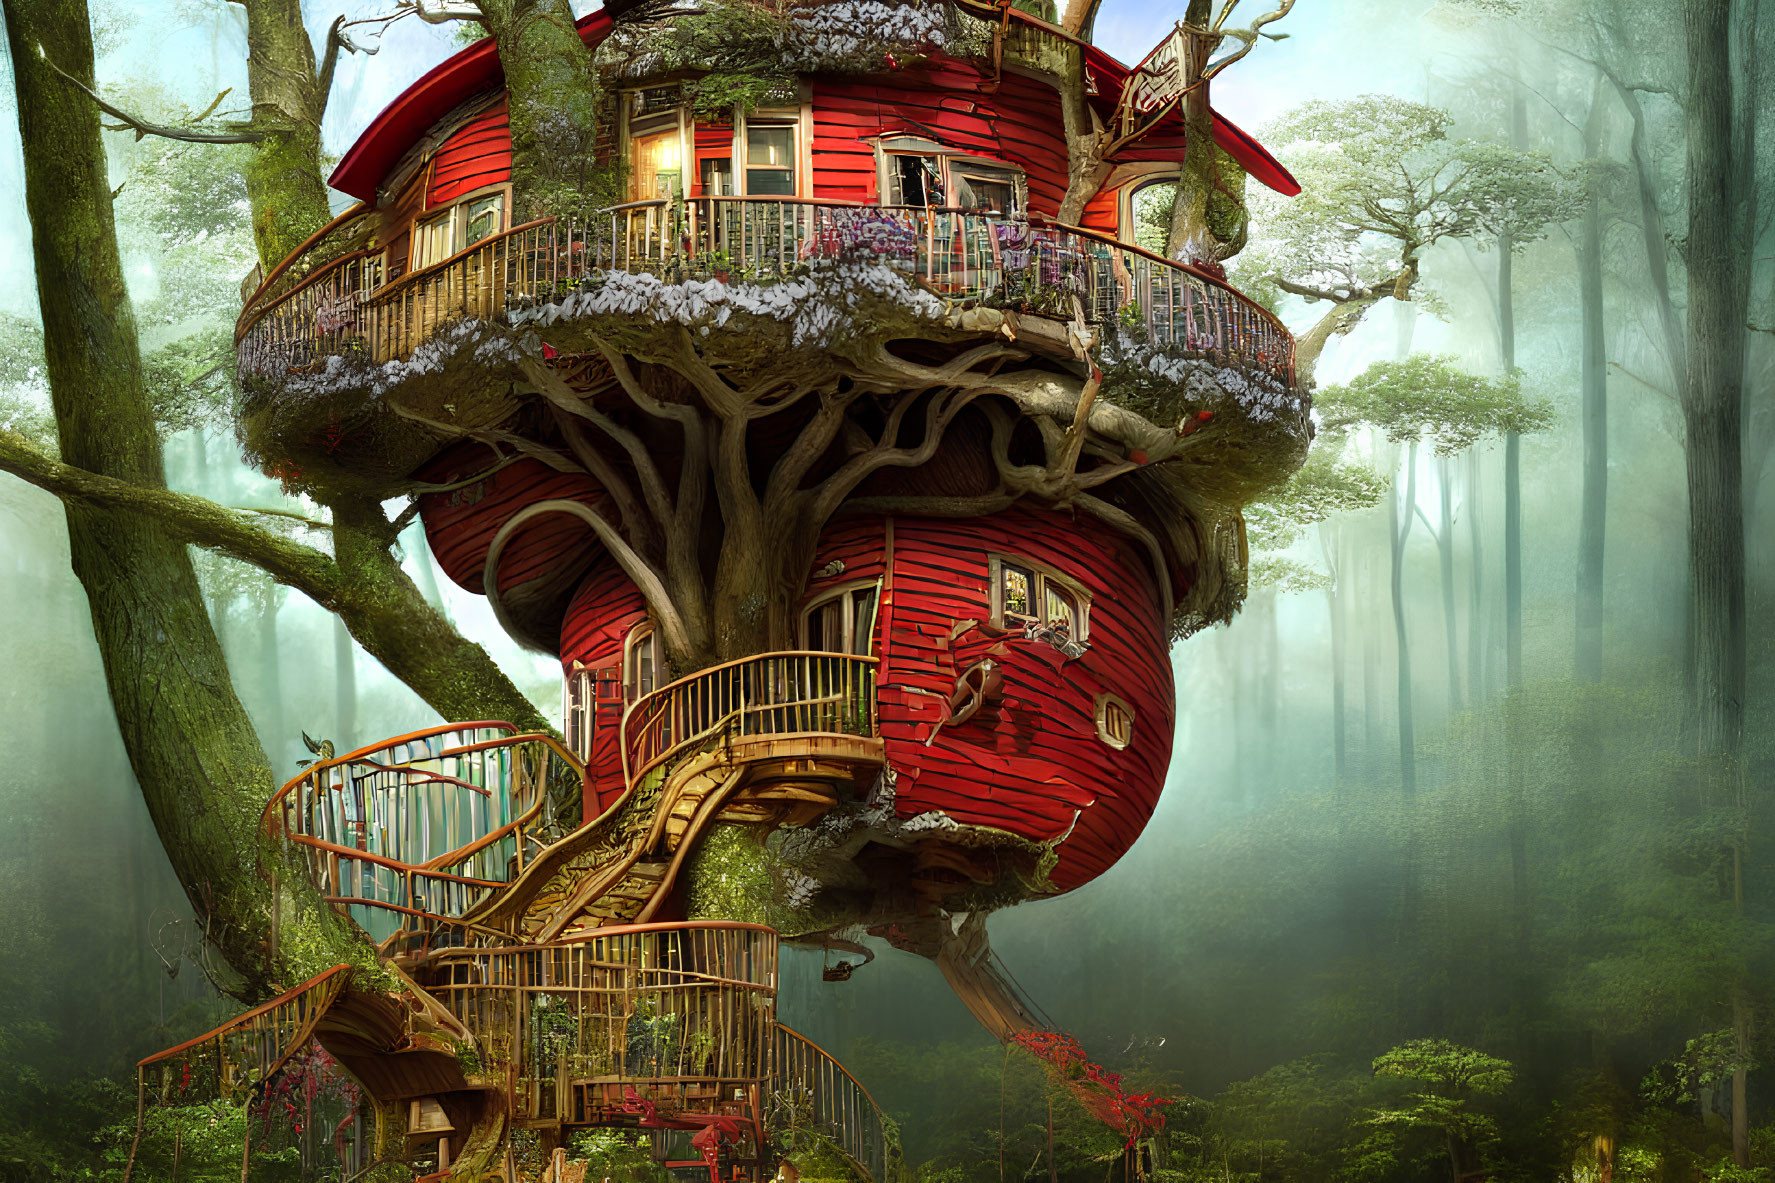 Red Treehouse with White-Trimmed Windows in Ancient Tree